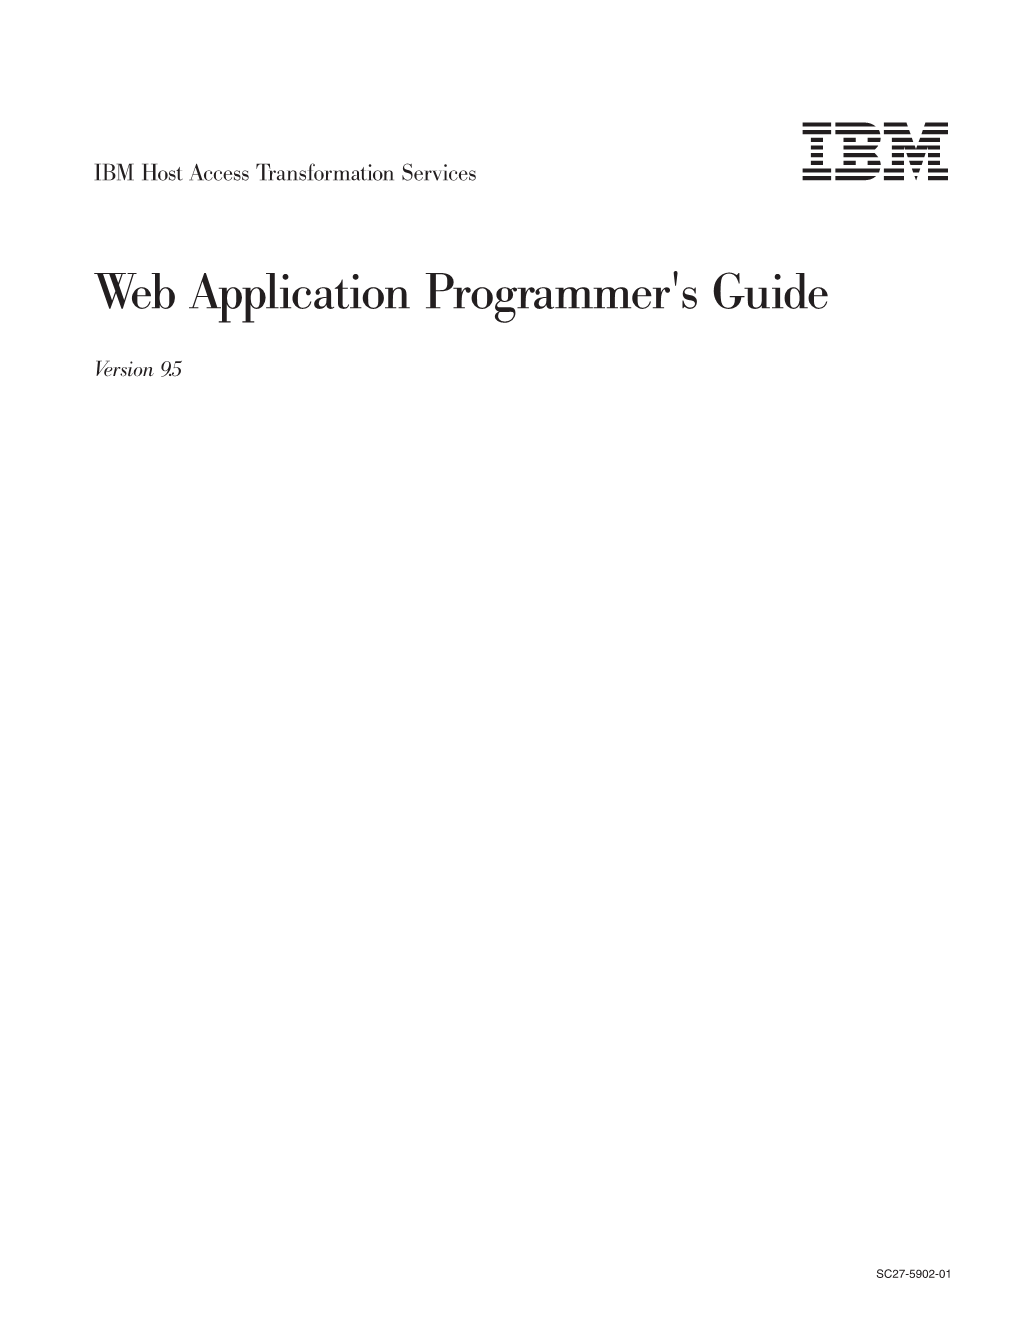 IBM Host Access Transformation Services: Web Application Programmer's Guide Getsharedglobalvariable